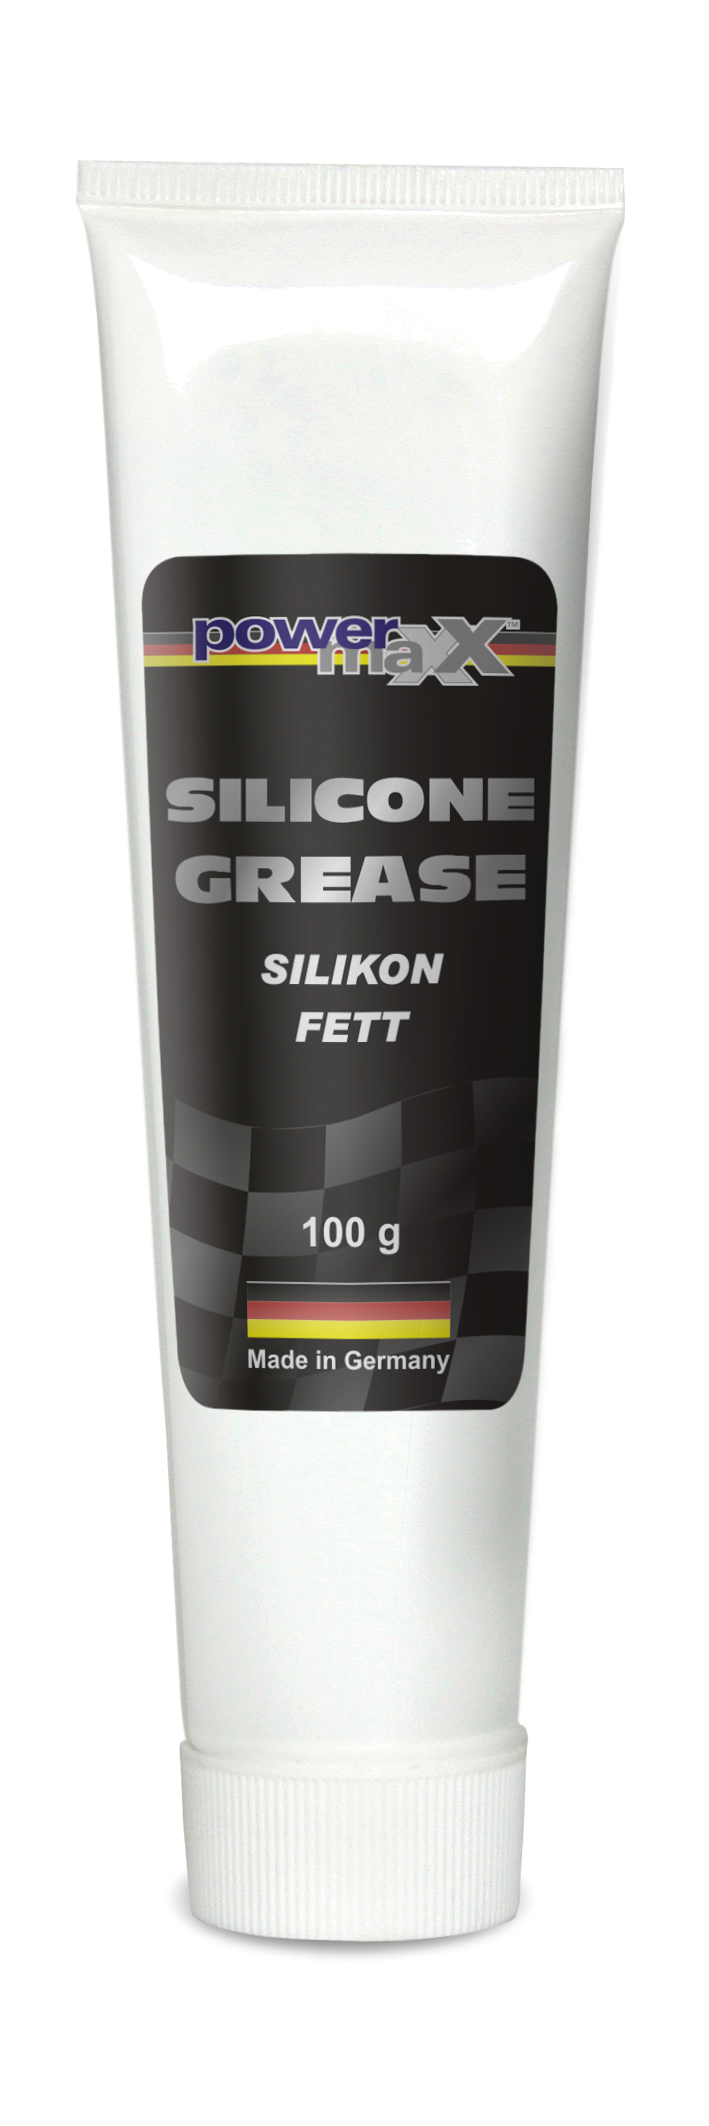 https://oelluxx24.de/media/image/38/fe/3d/BC-22106_SIG-BC_SiliconeGrease_100G_PIC_1OiogyIimRIMXW.png